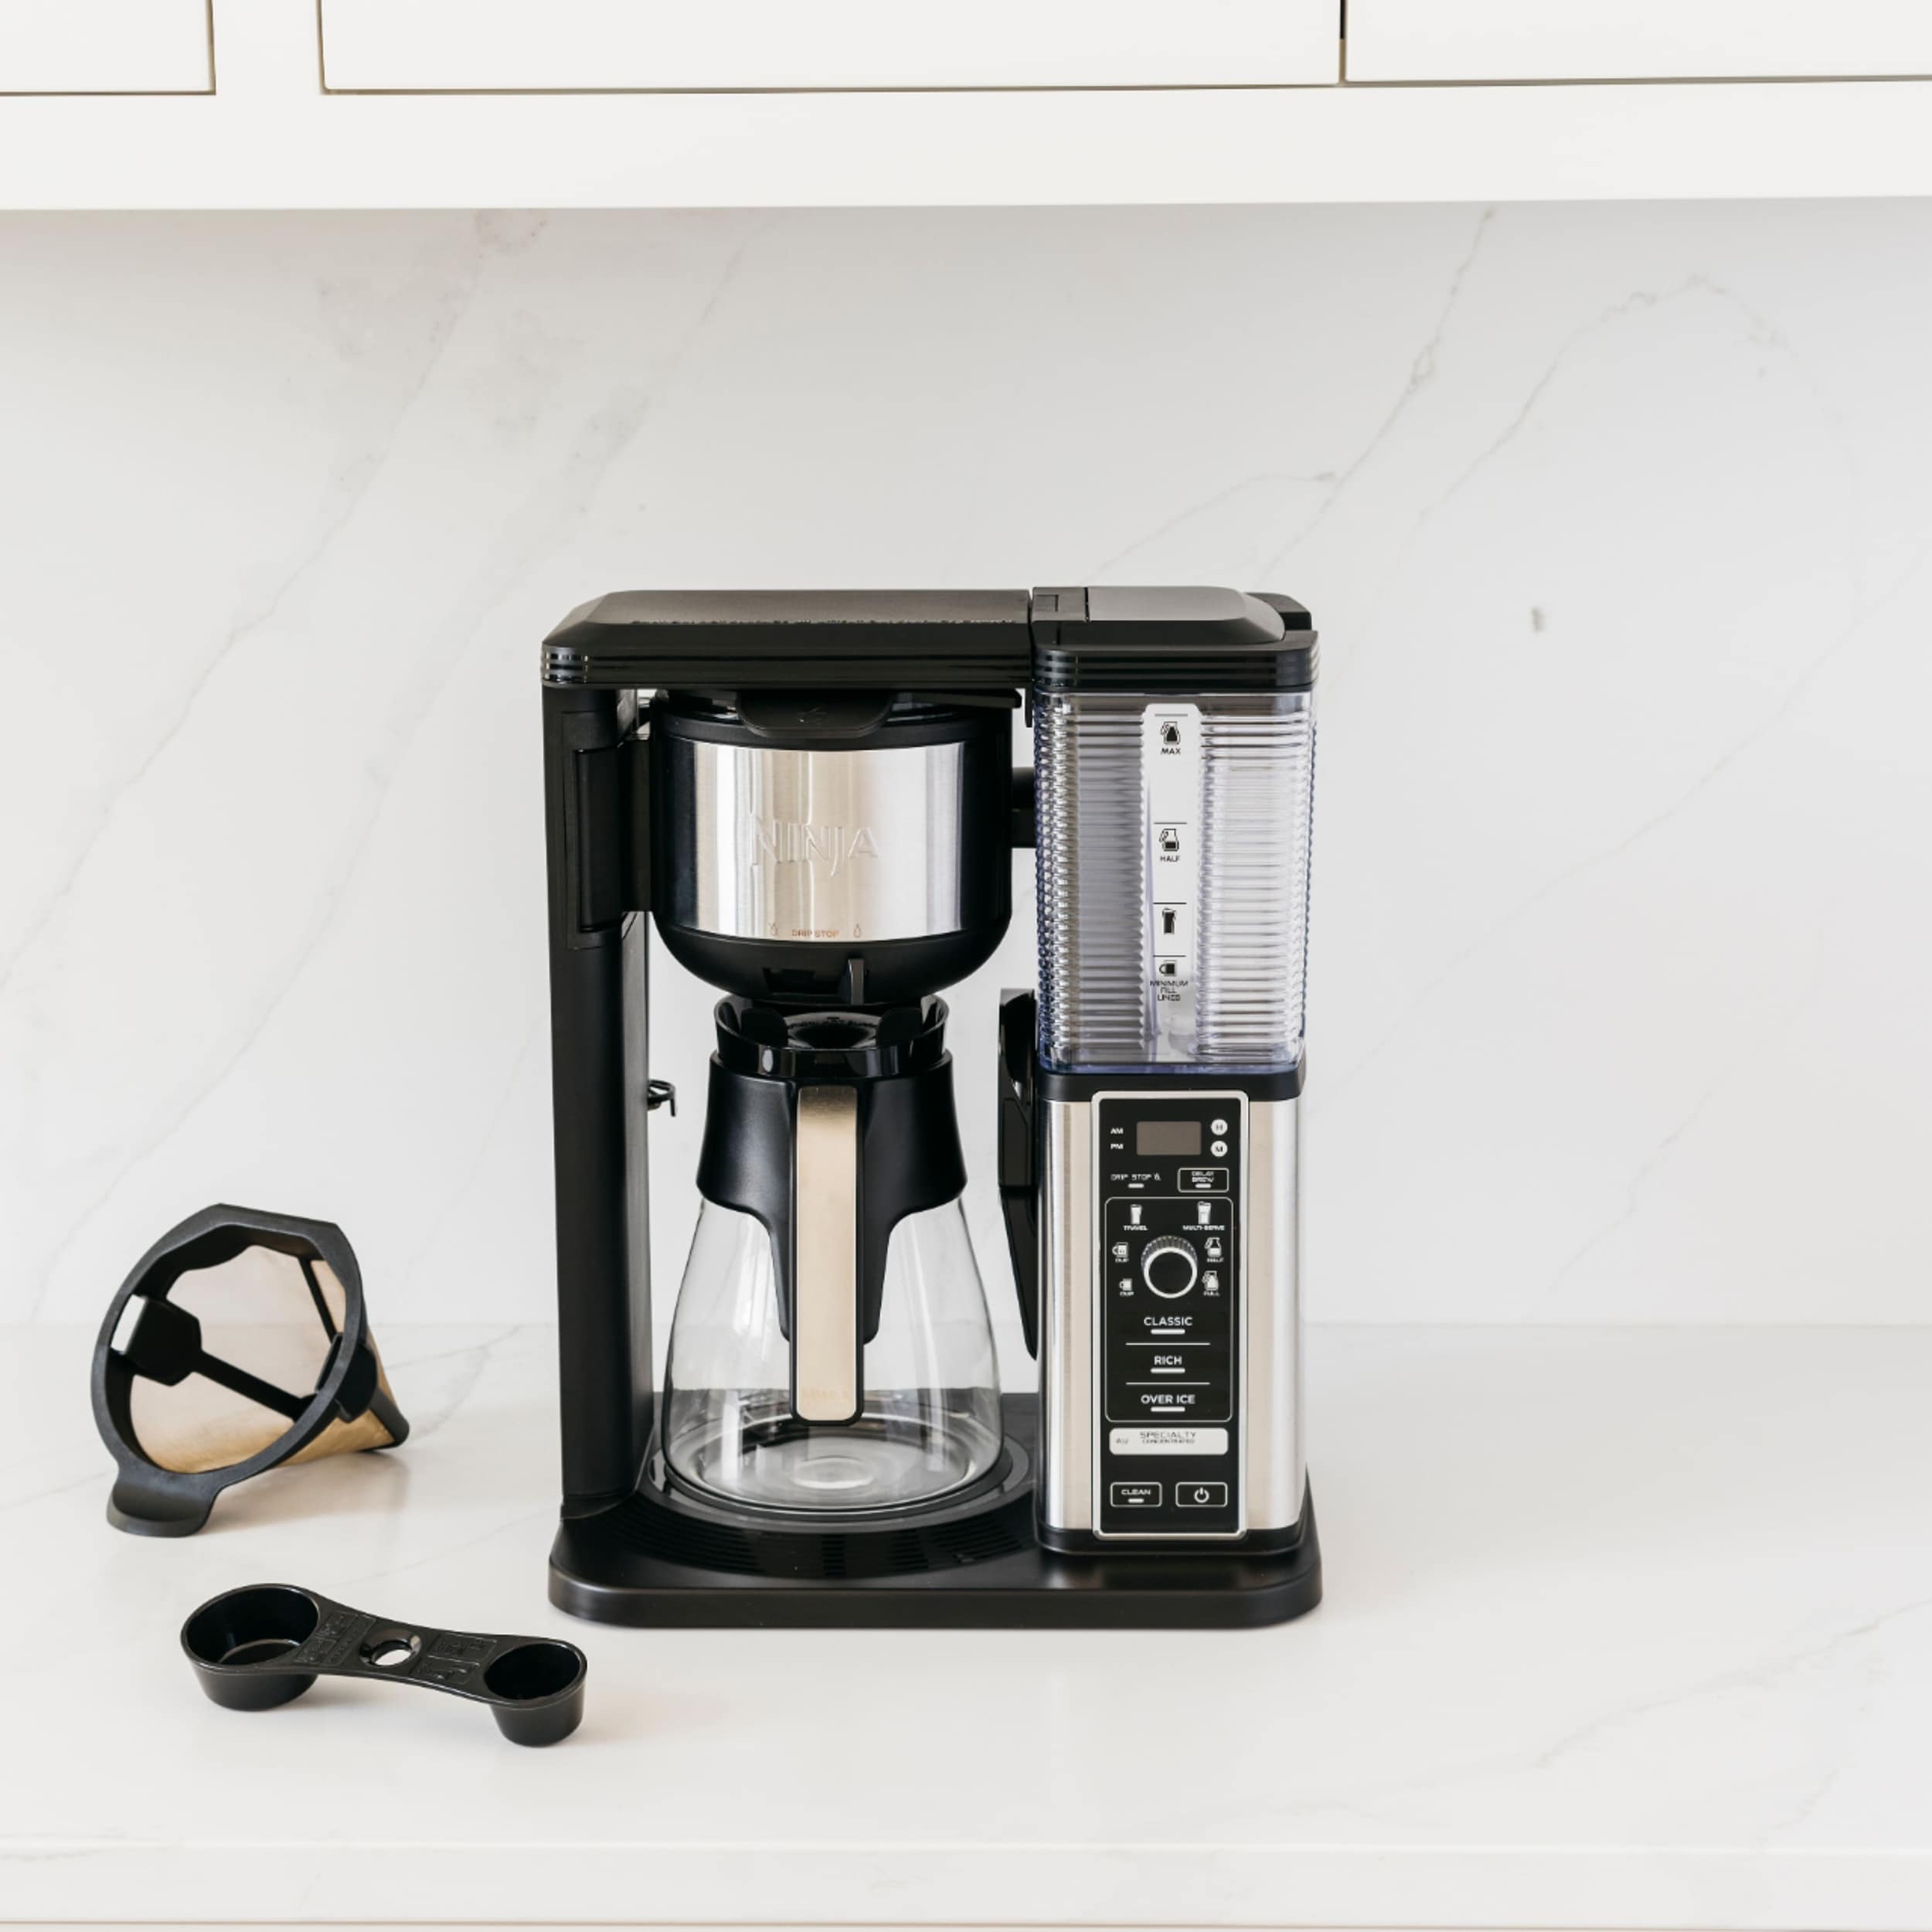 Ninja CM401 Specialty 10-Cup Coffee Maker for Sale in Boston, MA - OfferUp